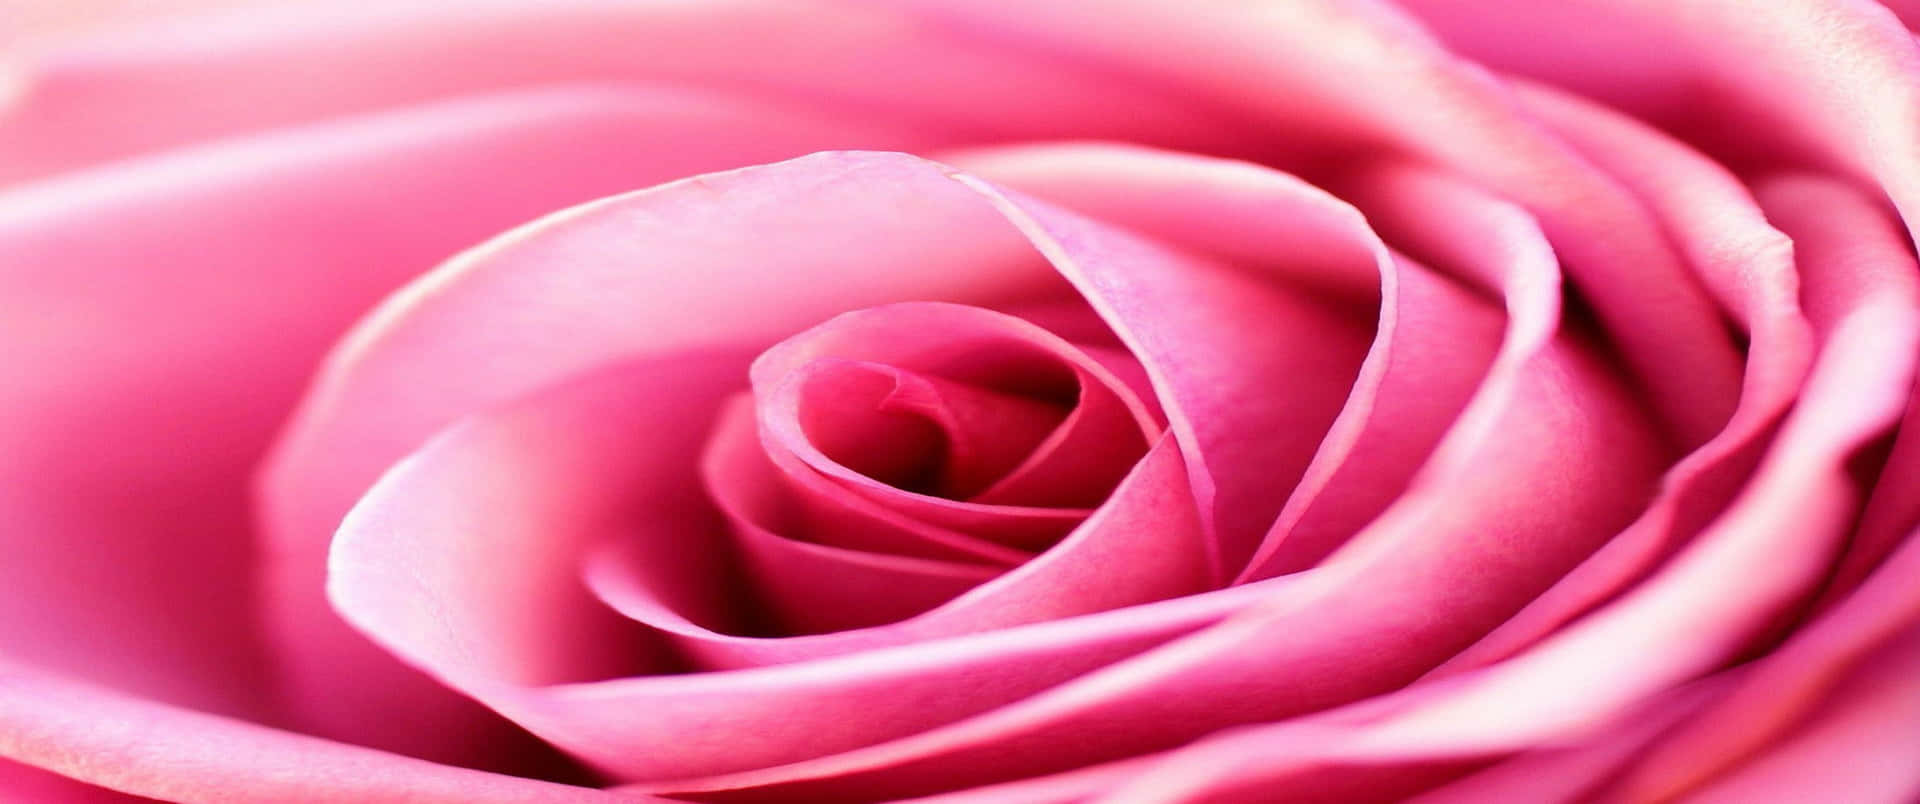 Gorgeous Close-up of a Rose Blooming